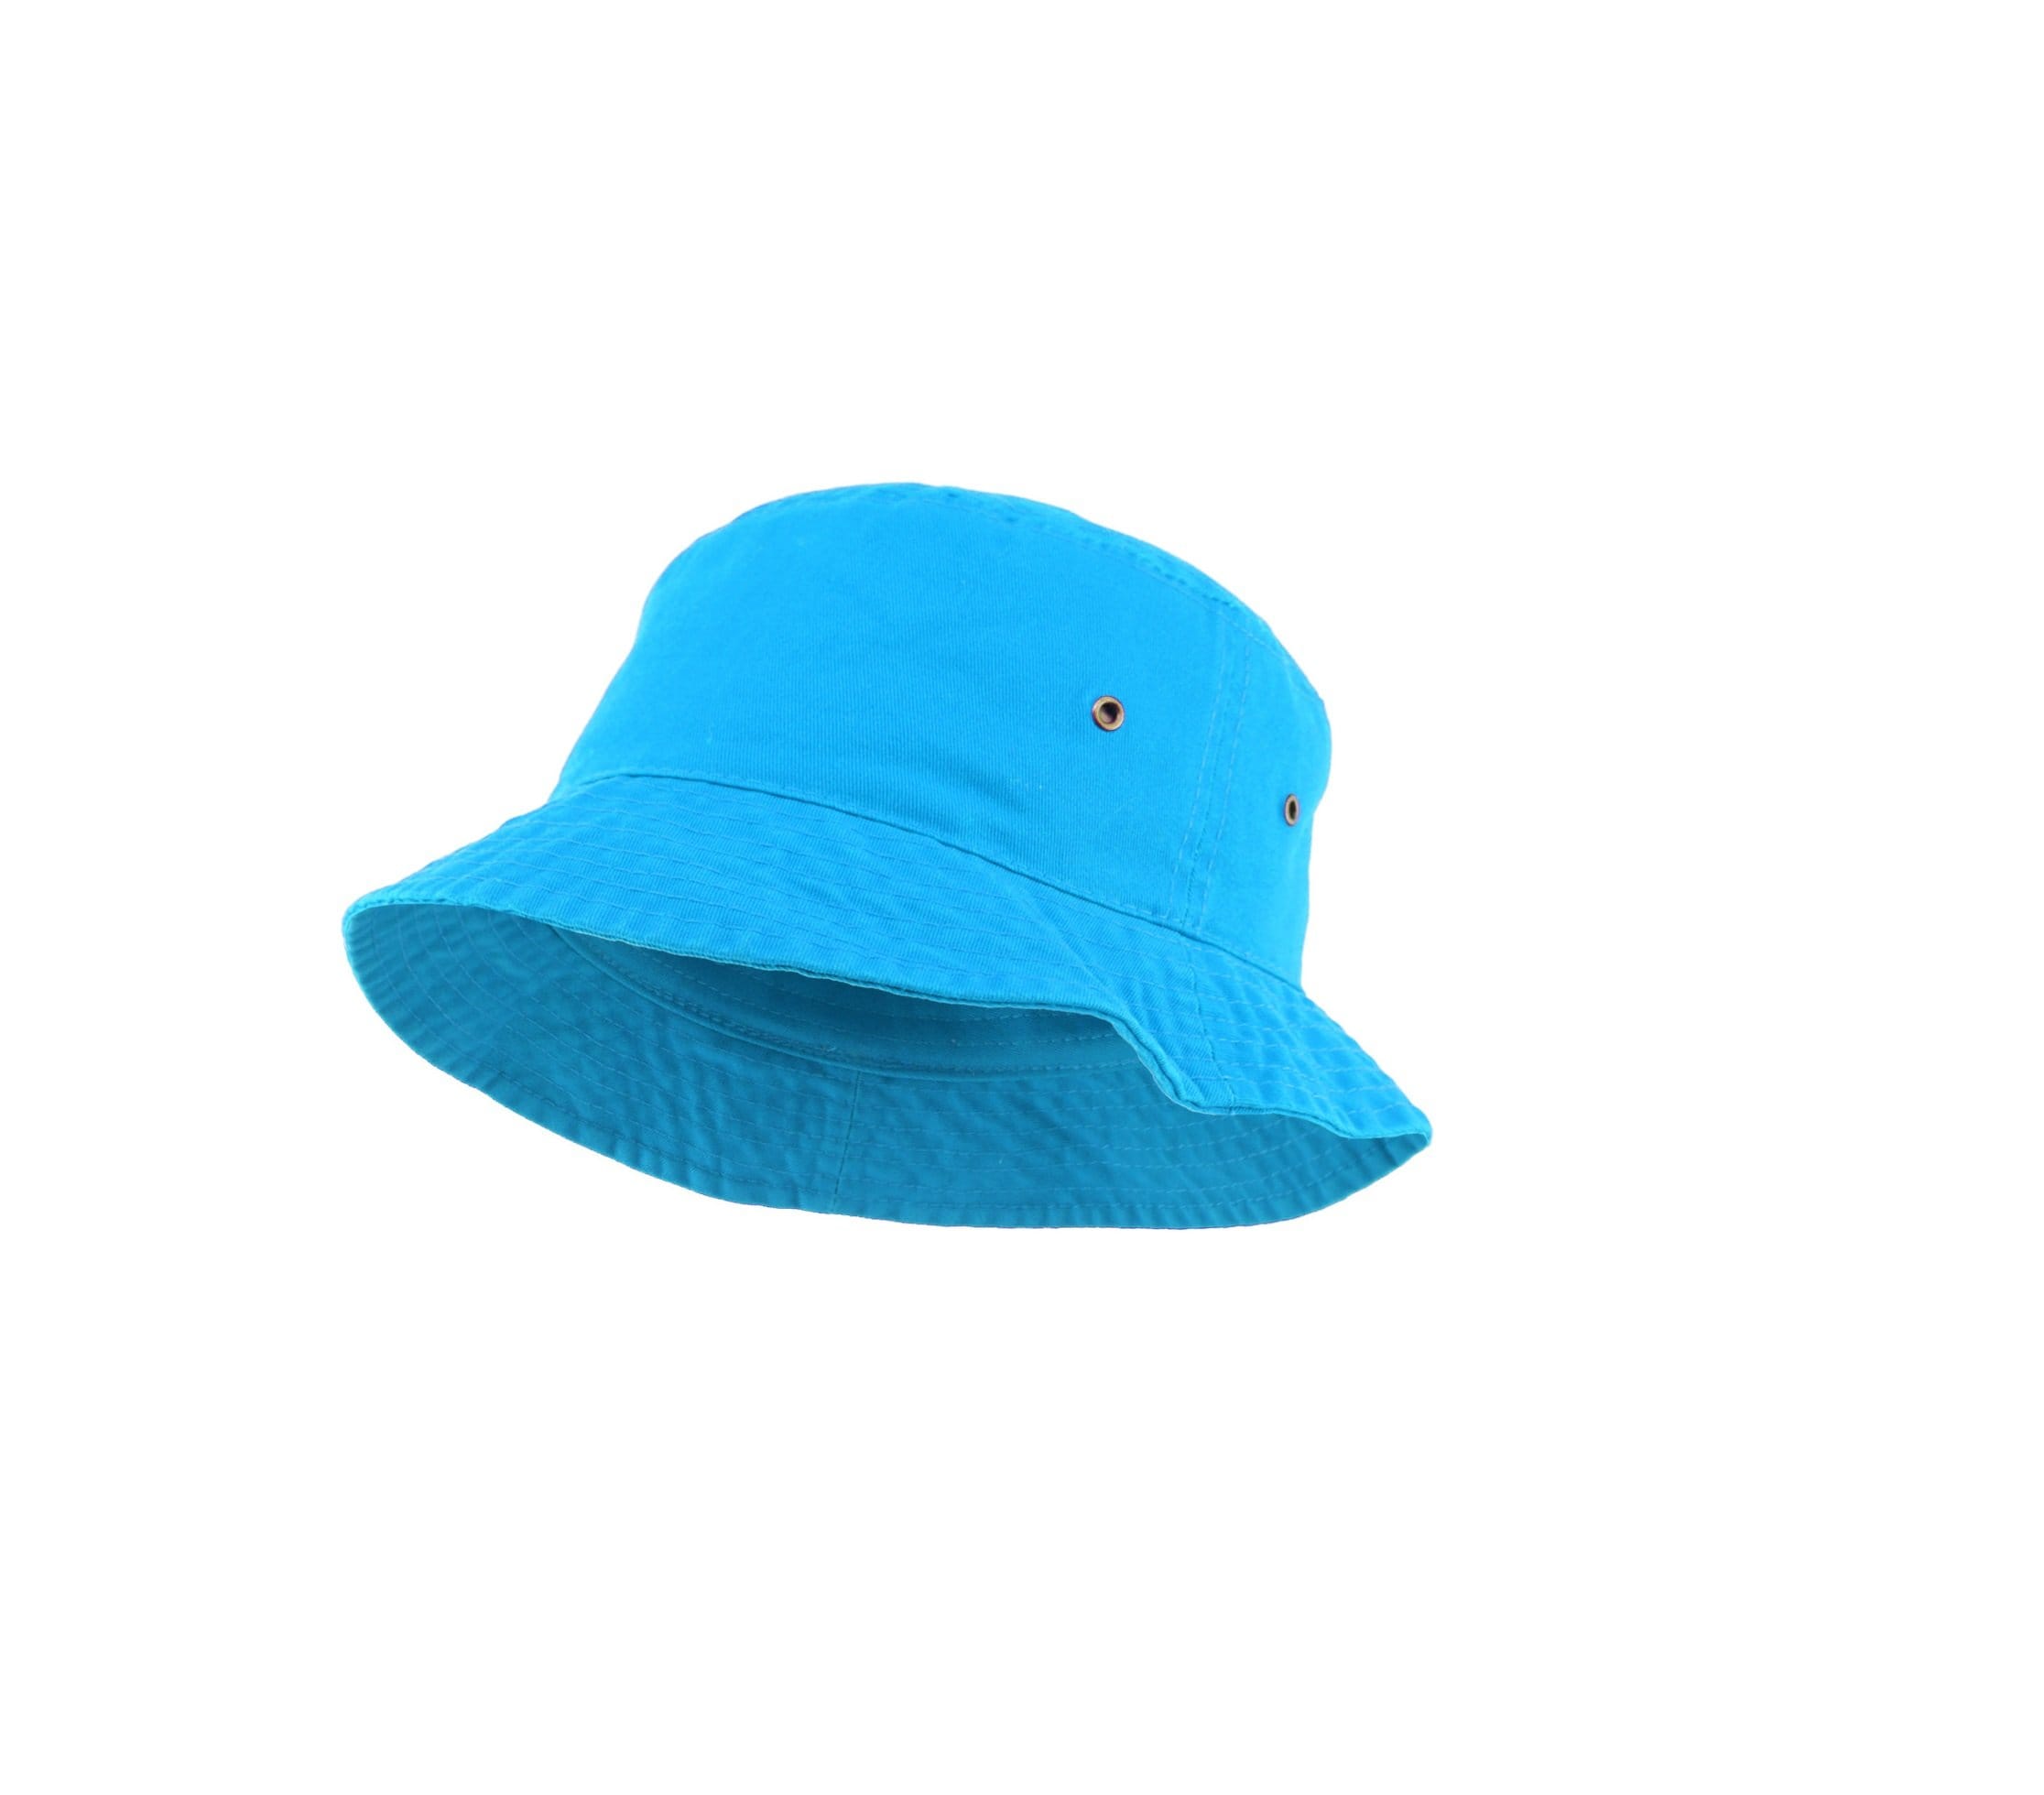 Grooveman Music Hats S/M / Aqua Solid Bucket Fitted Hat